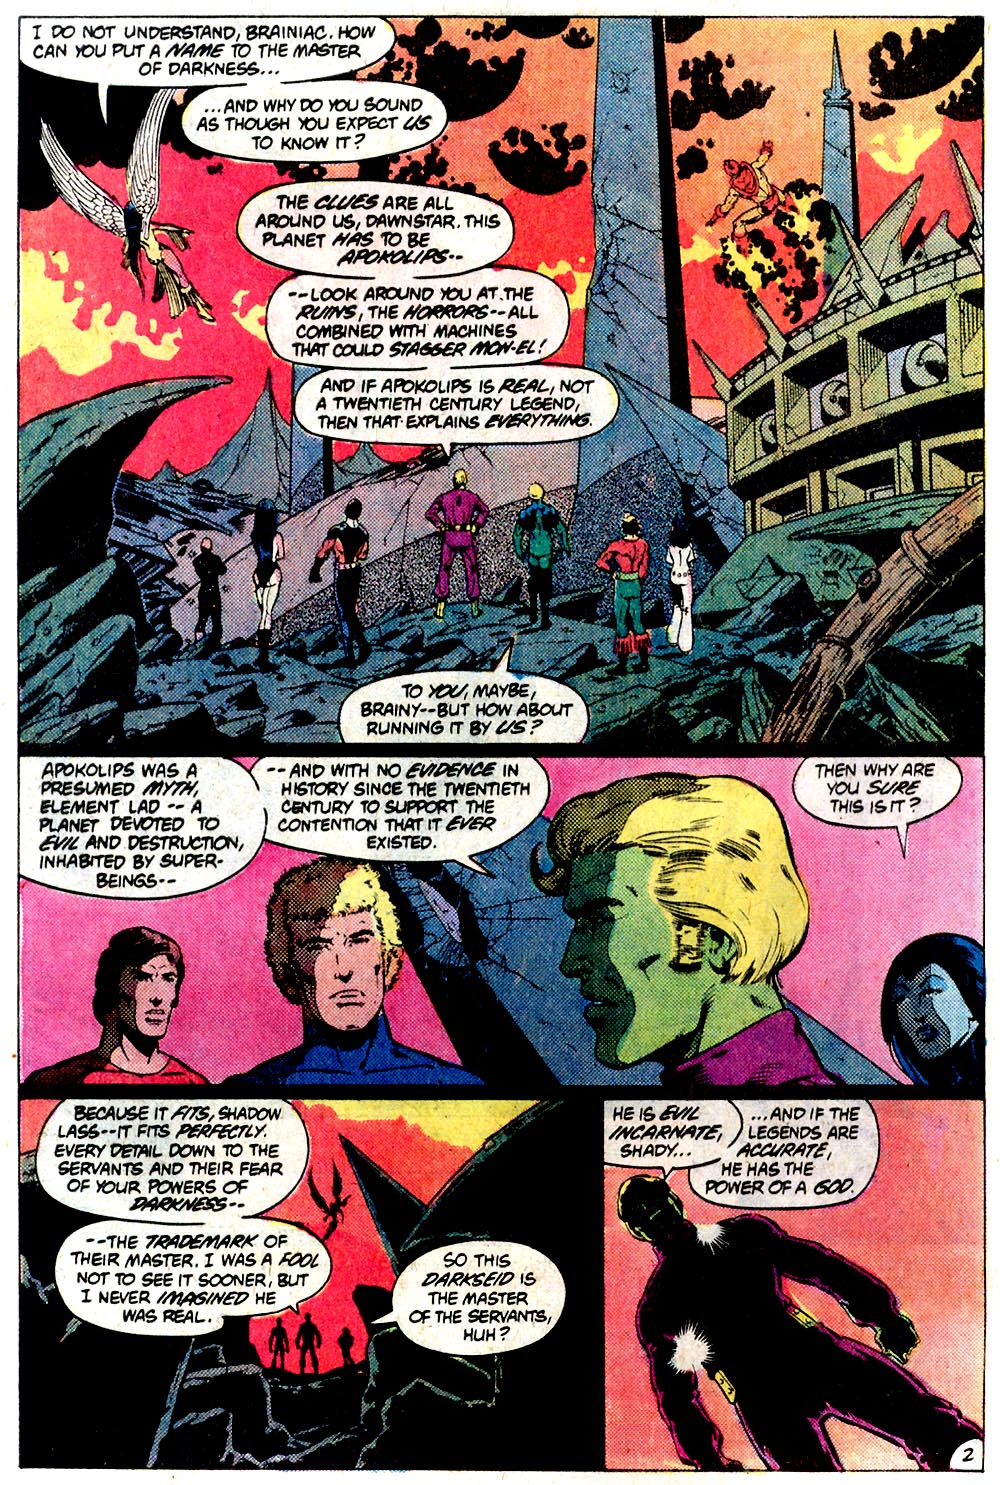 Legion of Super-Heroes (1980) 294 Page 2